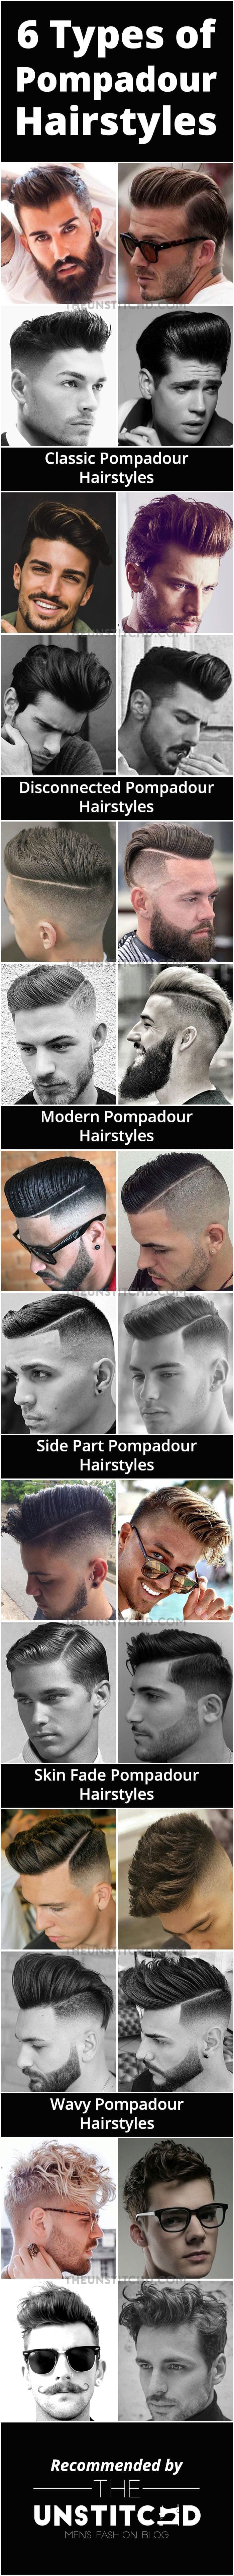 Pompadour-Hairstyle